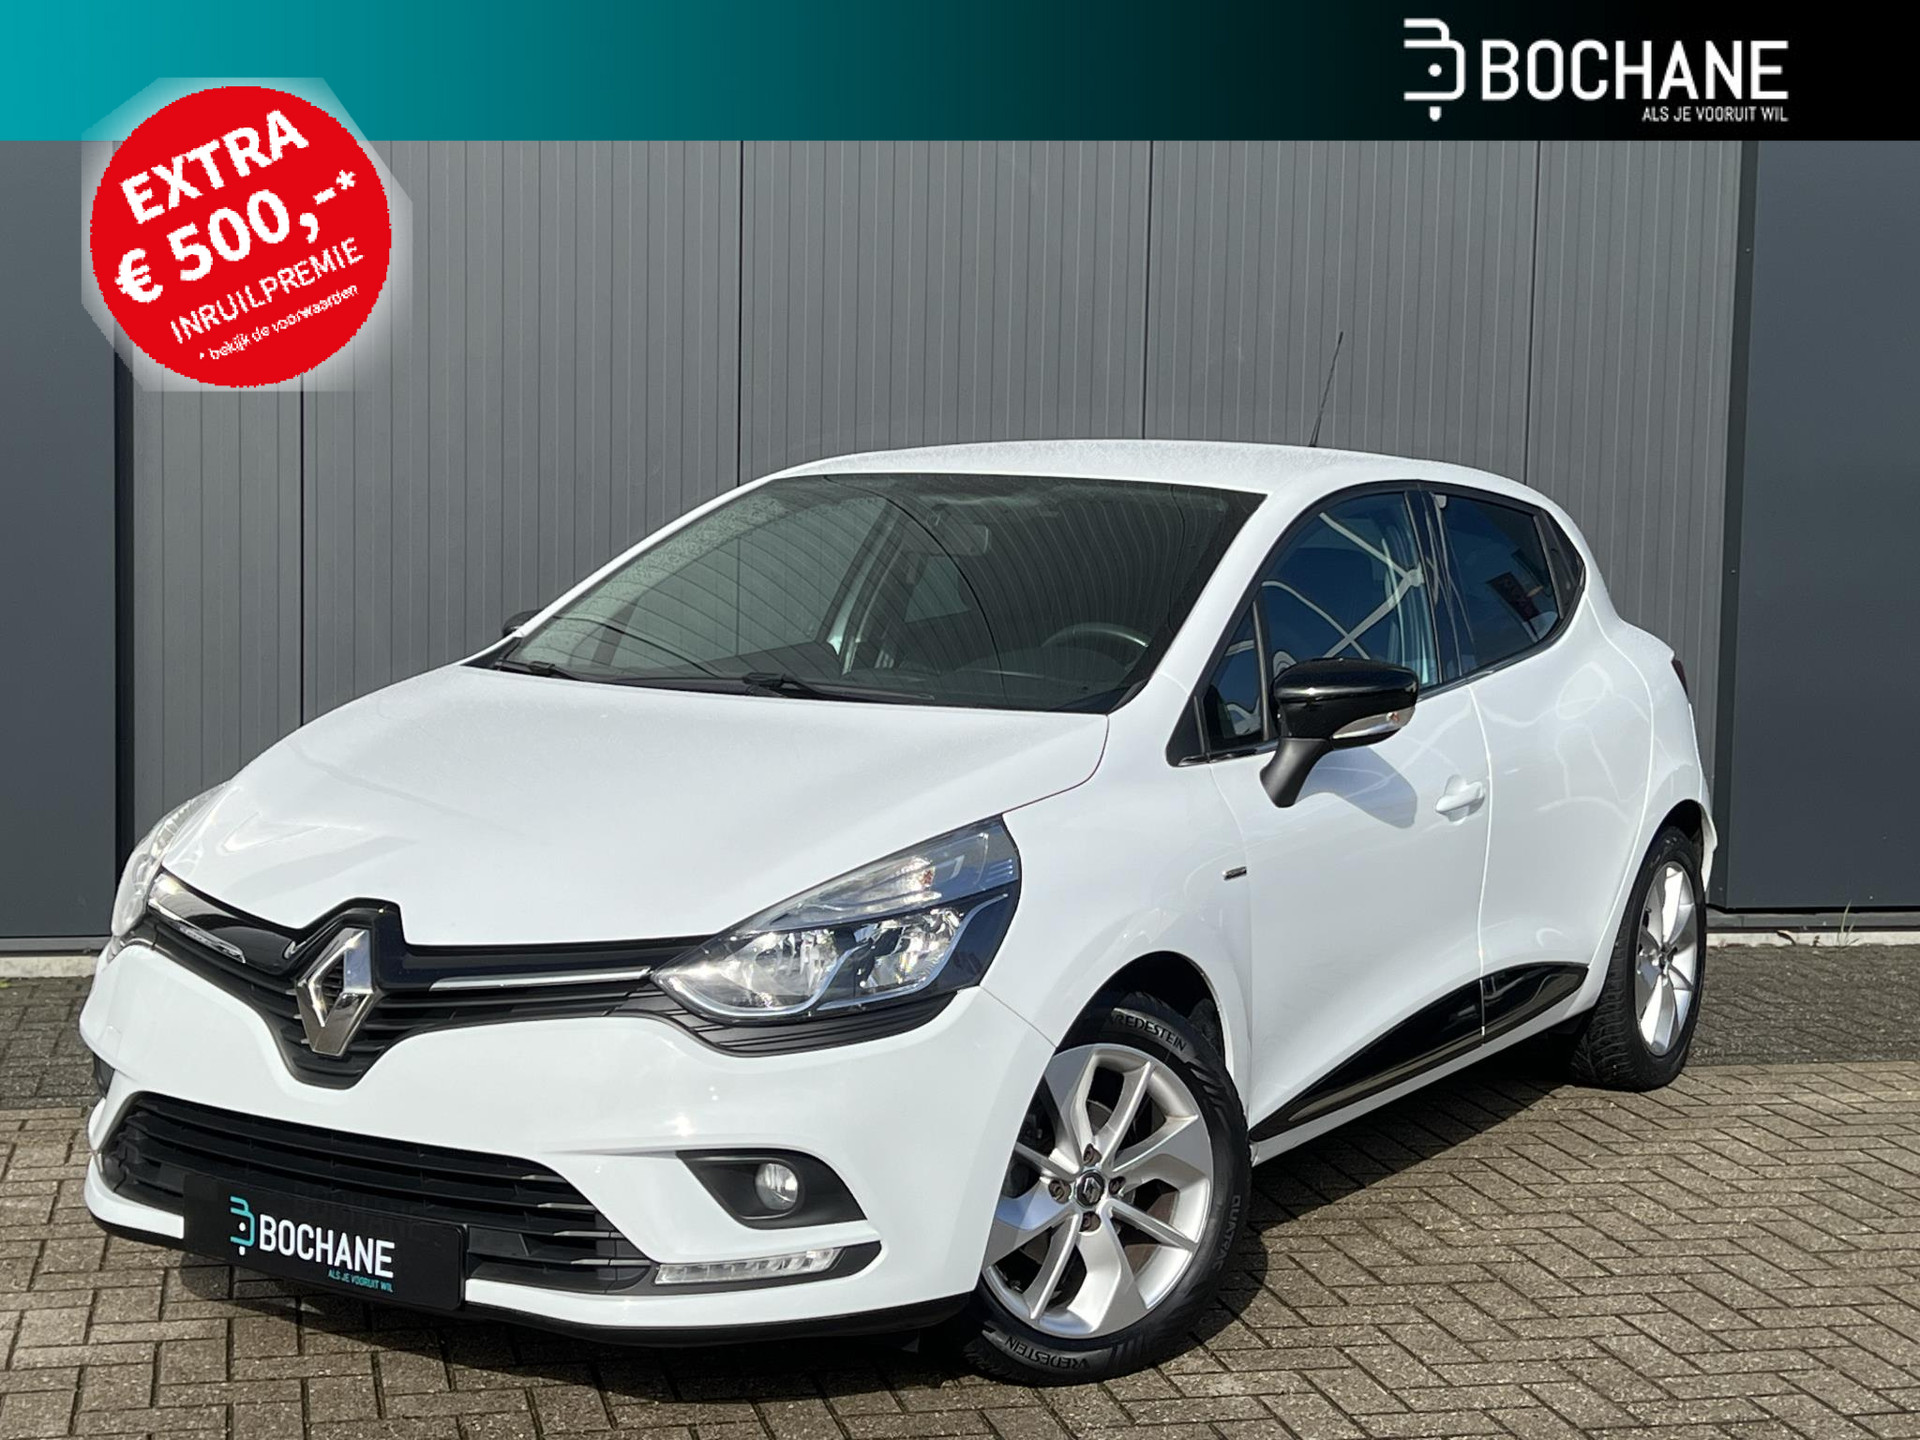 Renault Clio 0.9 TCe 90 Limited bij viaBOVAG.nl